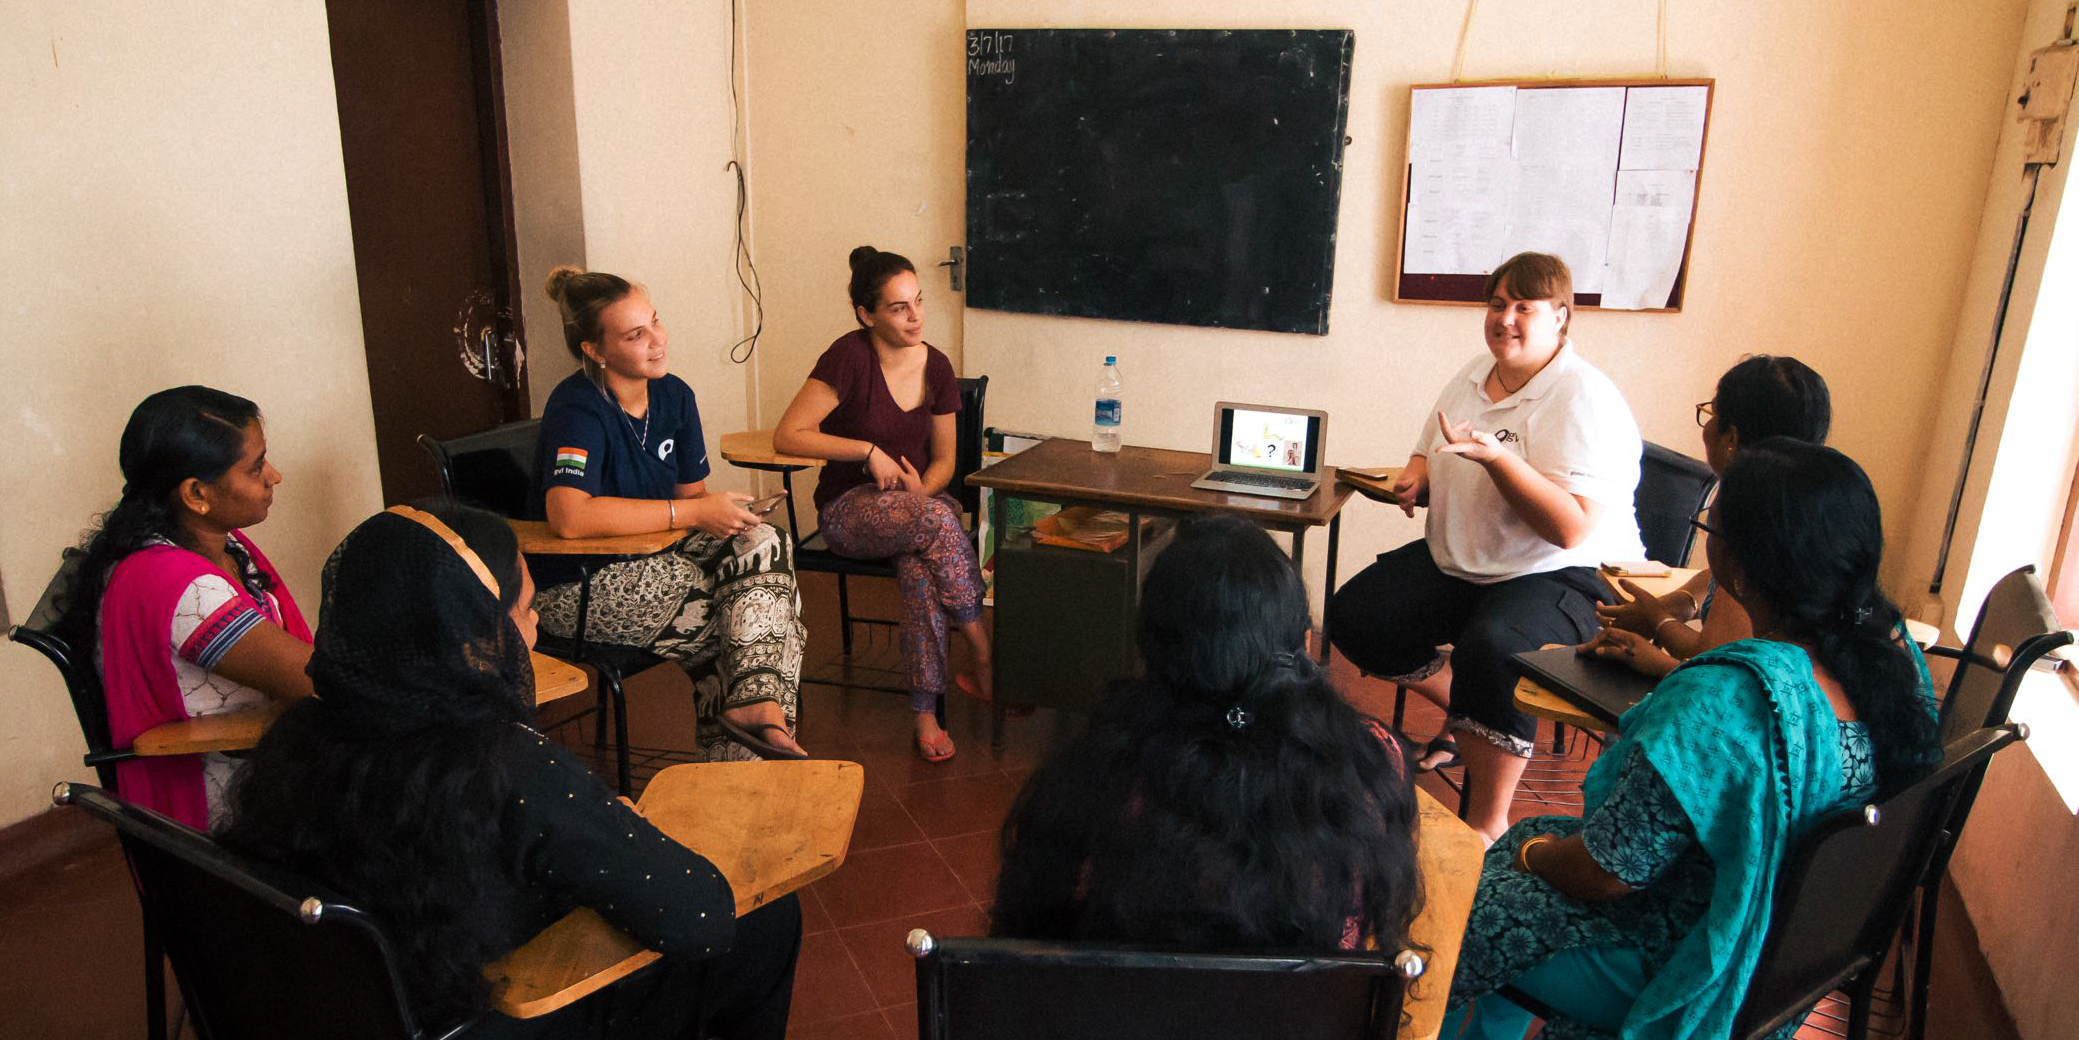 This women's empowerment program in India is one of the best volunteer abroad programs for adults. These women teach each other valuable skills, and discuss women's empowerment.